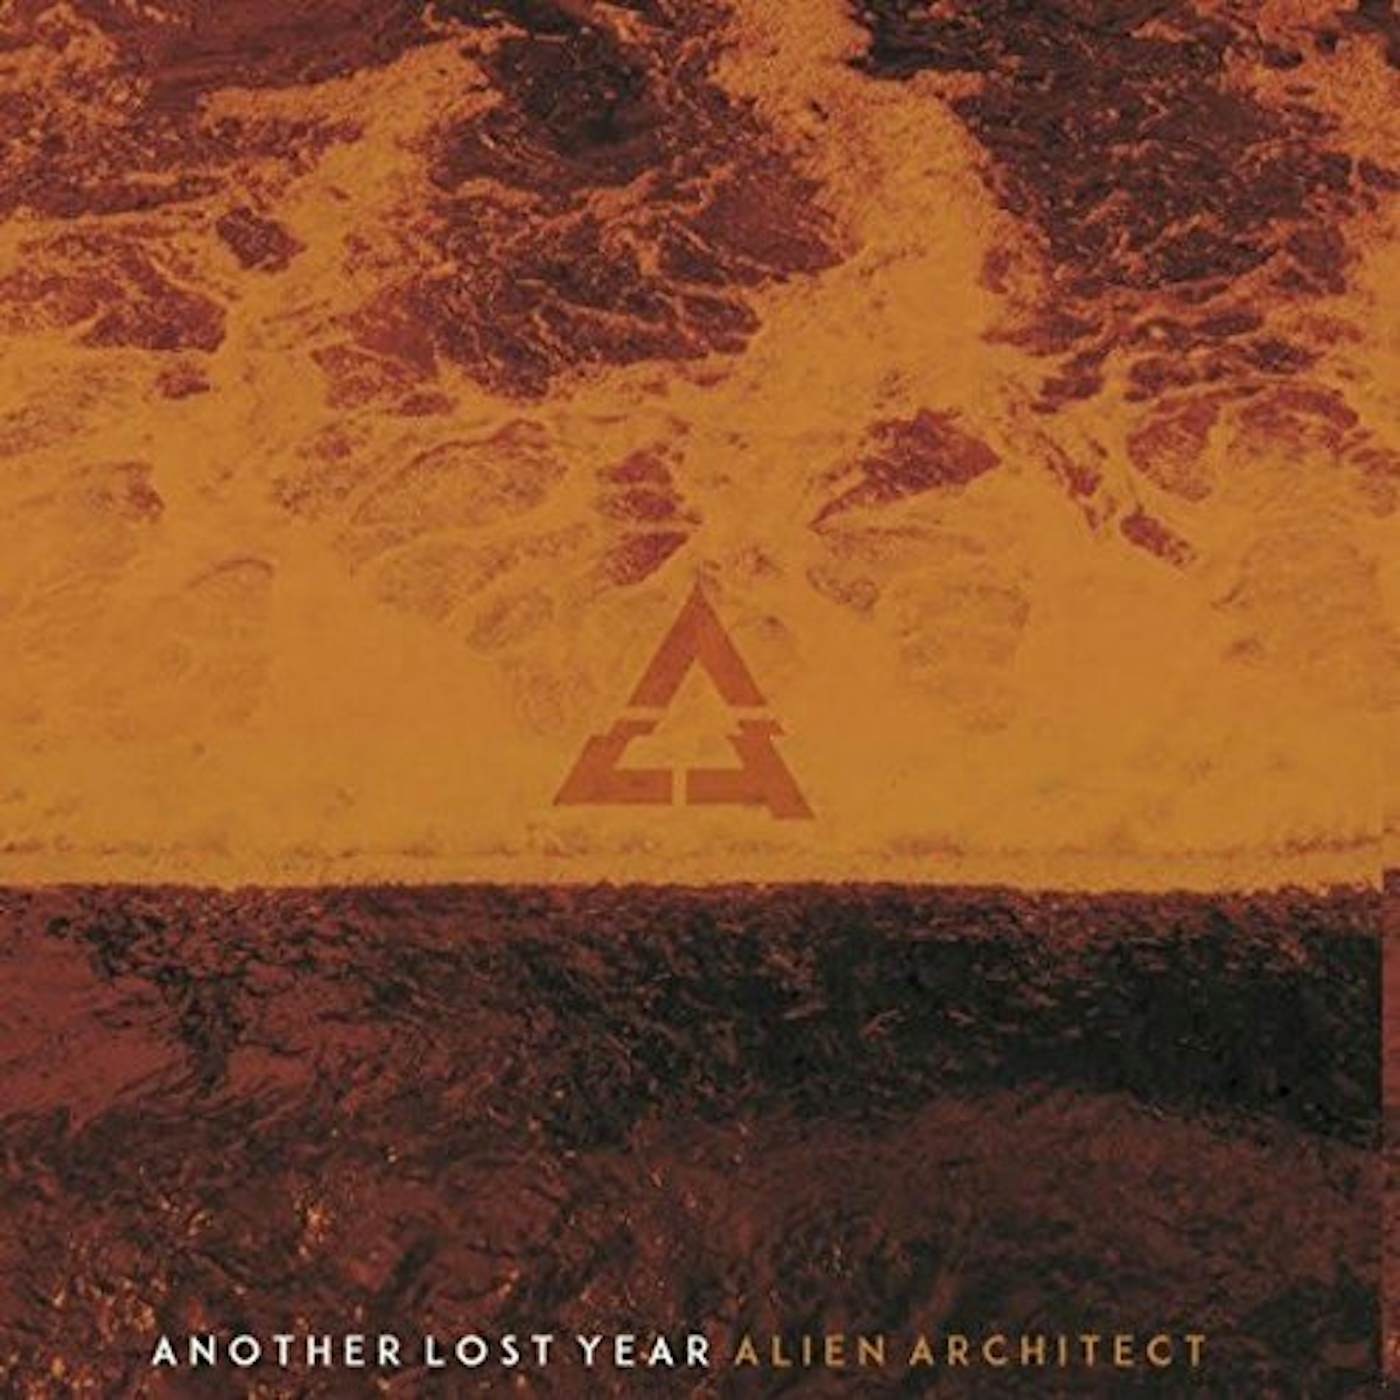 Another Lost Year ALIEN ARCHITECT CD